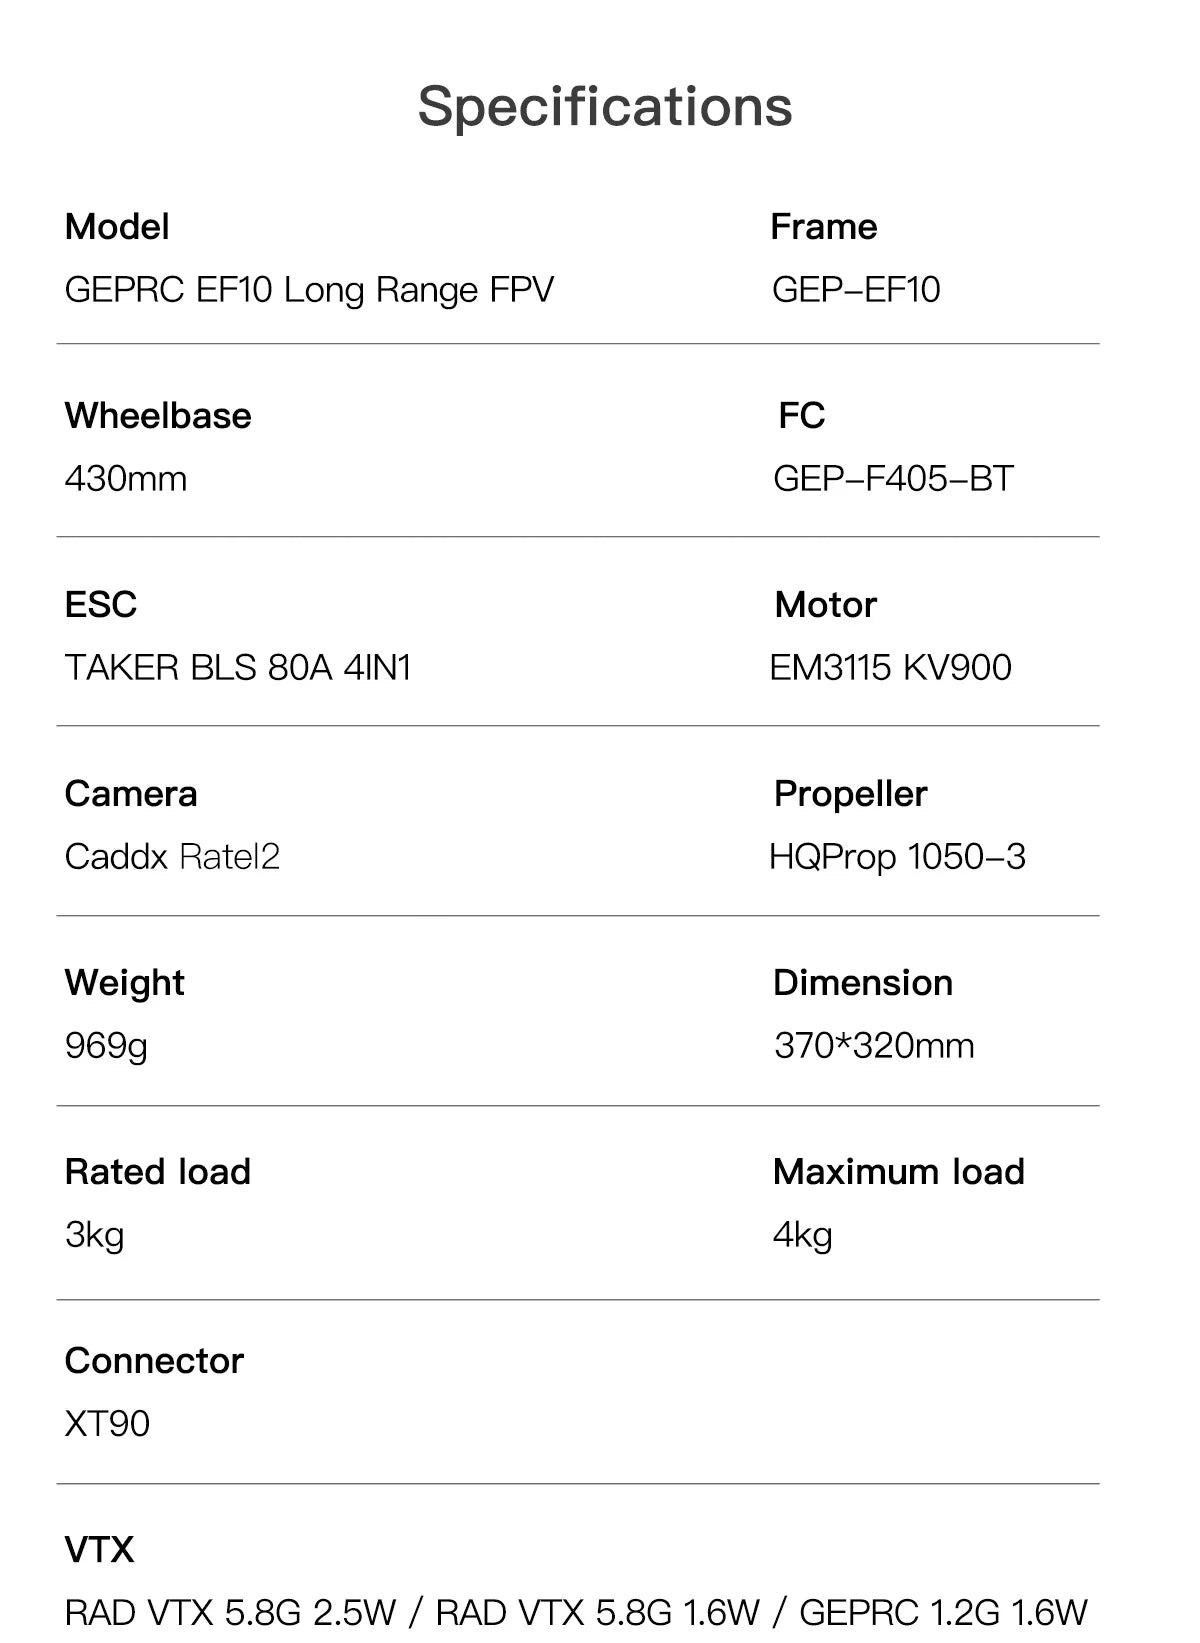 GEPRC EF10 5.8G 1.6W Long Range 10inch FPV, HQProp 1050-3 Weight Dimension 969g 370*32Omm Rated